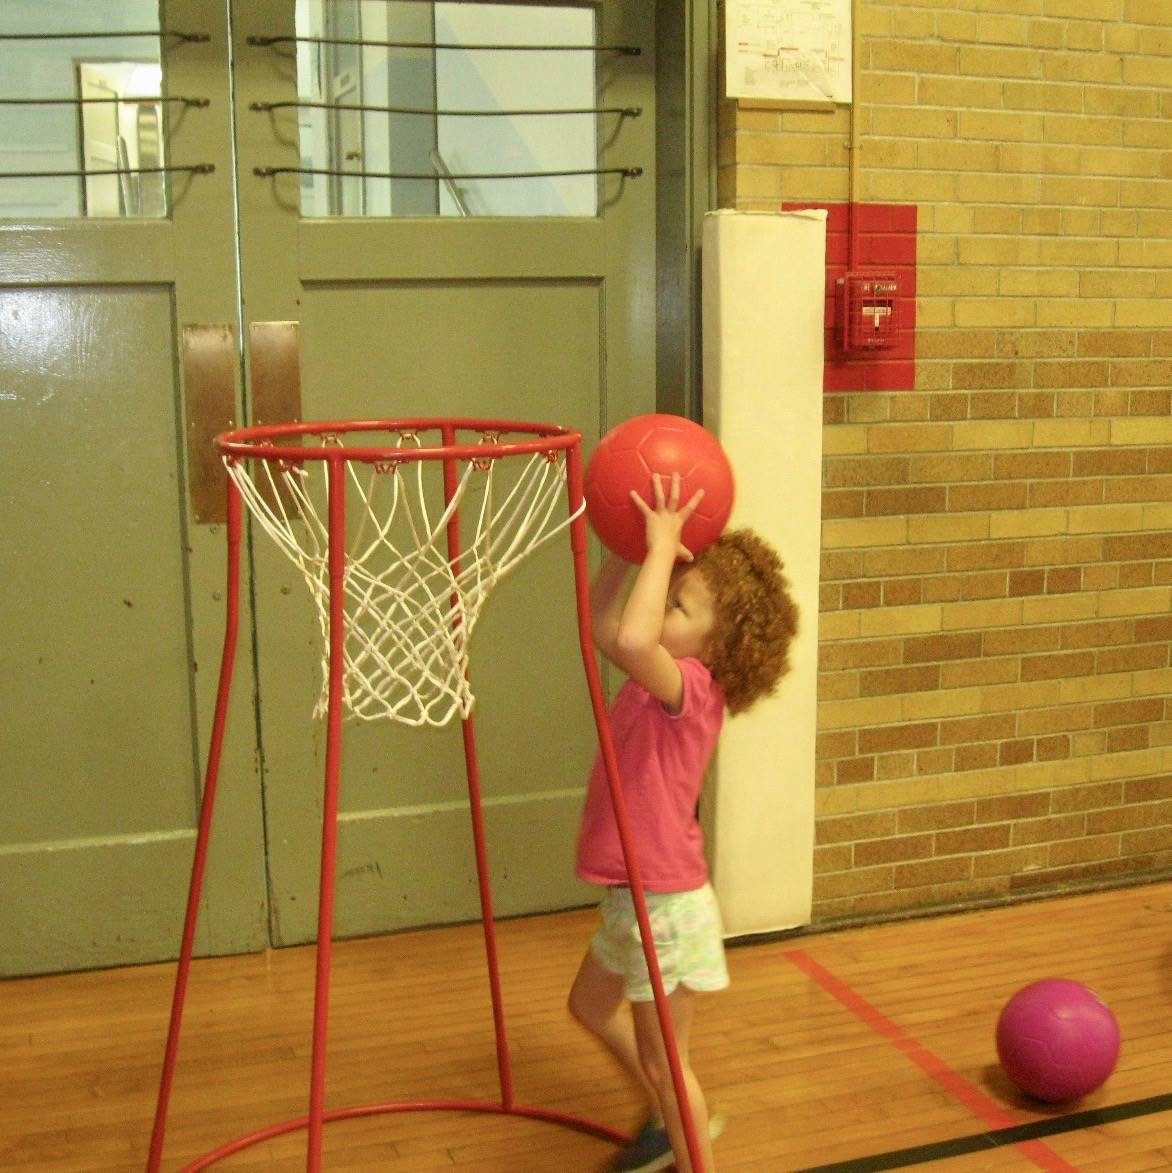 A student dunks a basketball in basket!